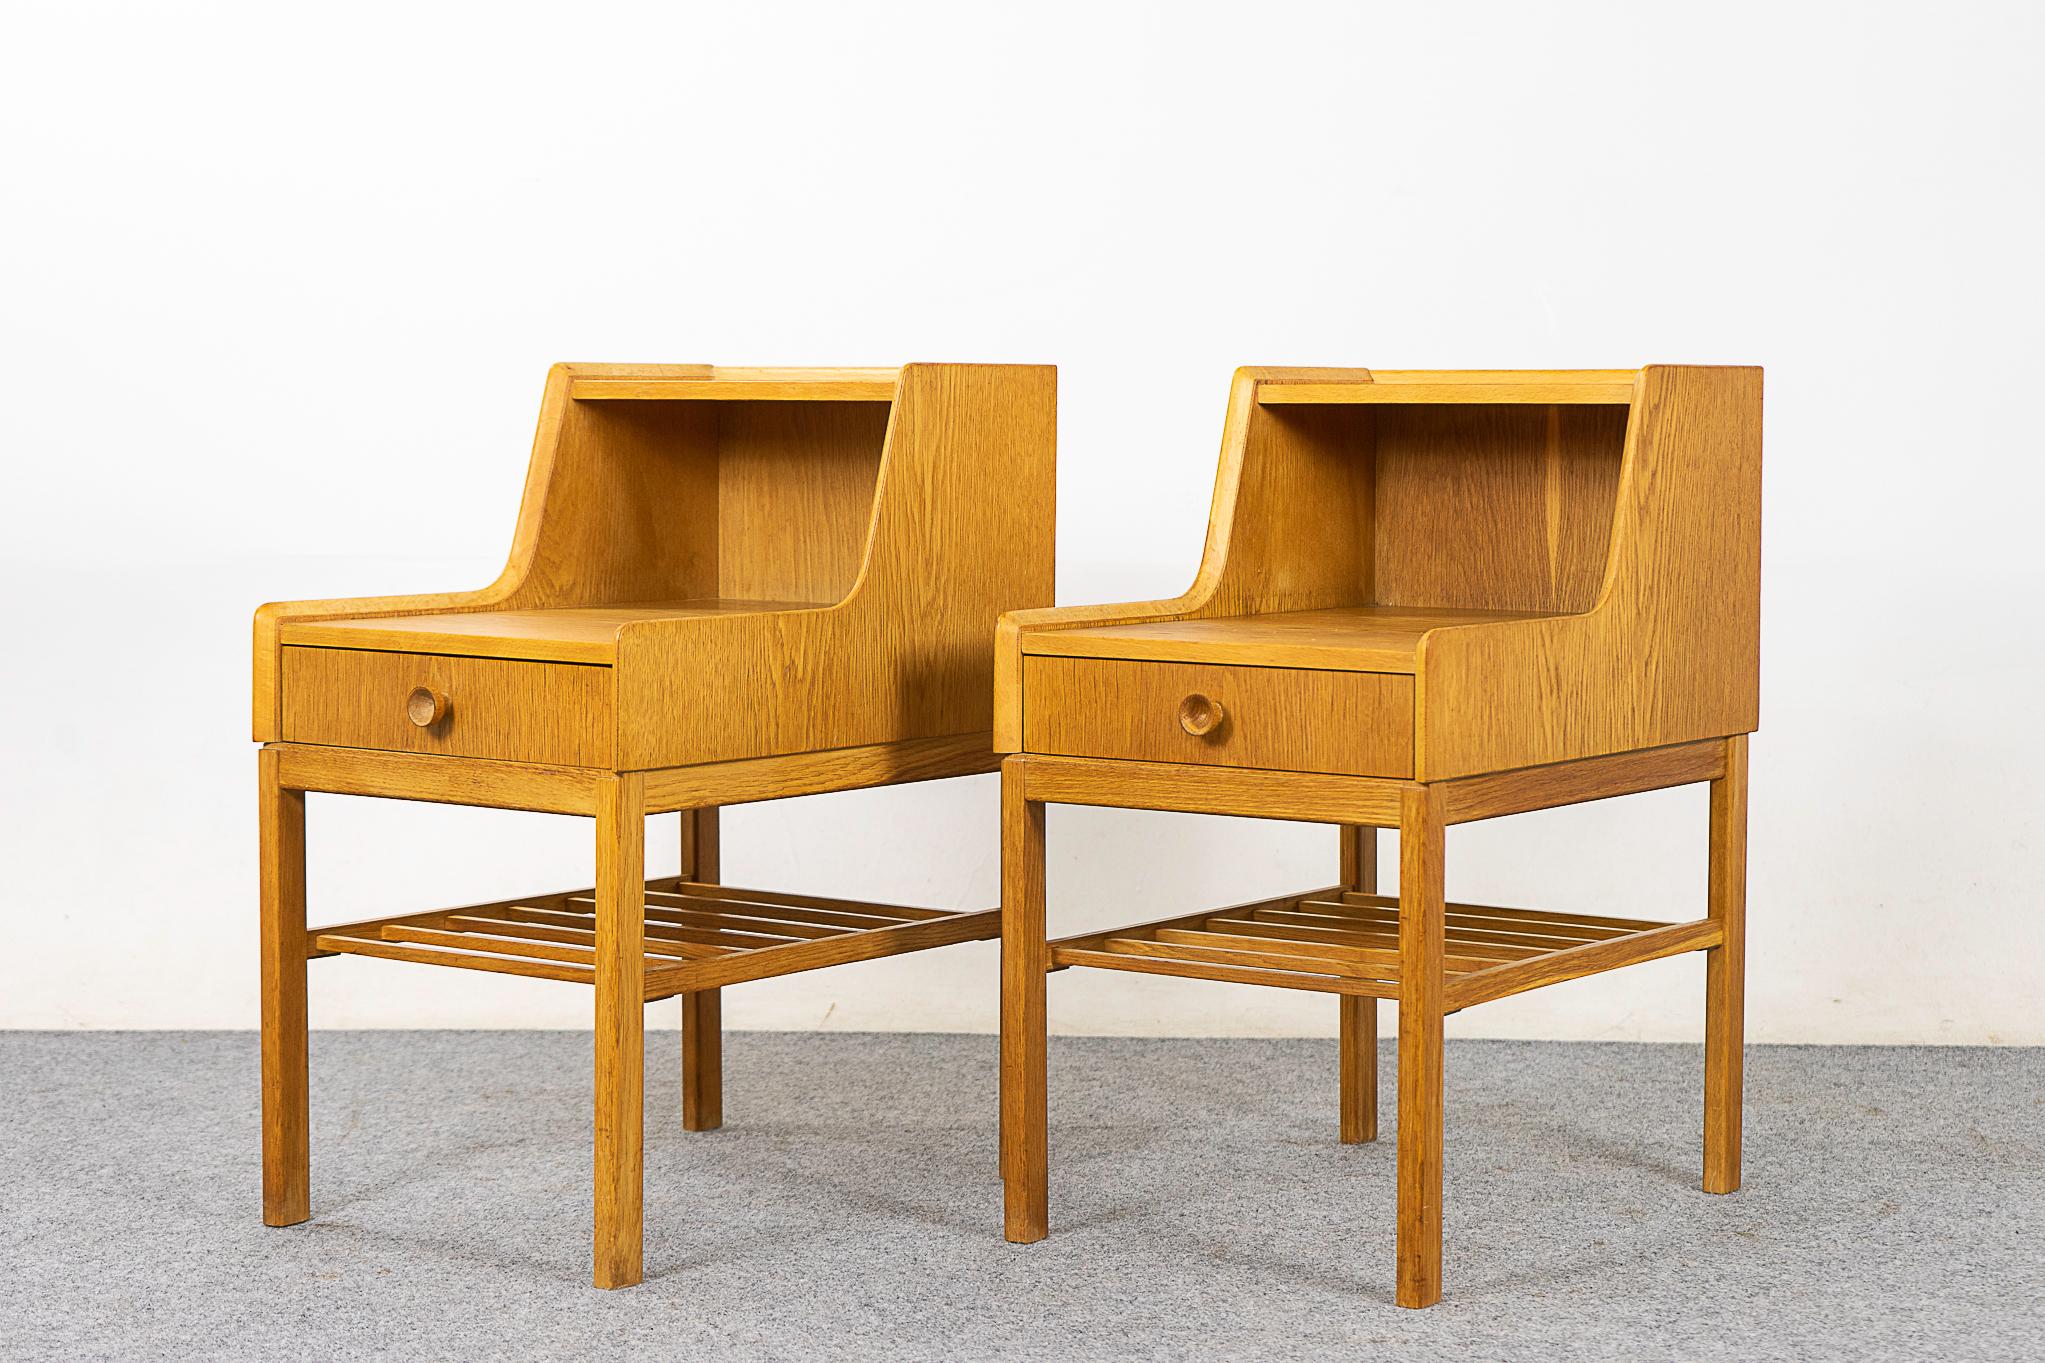 Mid-20th Century Pair of Danish Mid-Century Modern Oak Bedside Tables For Sale